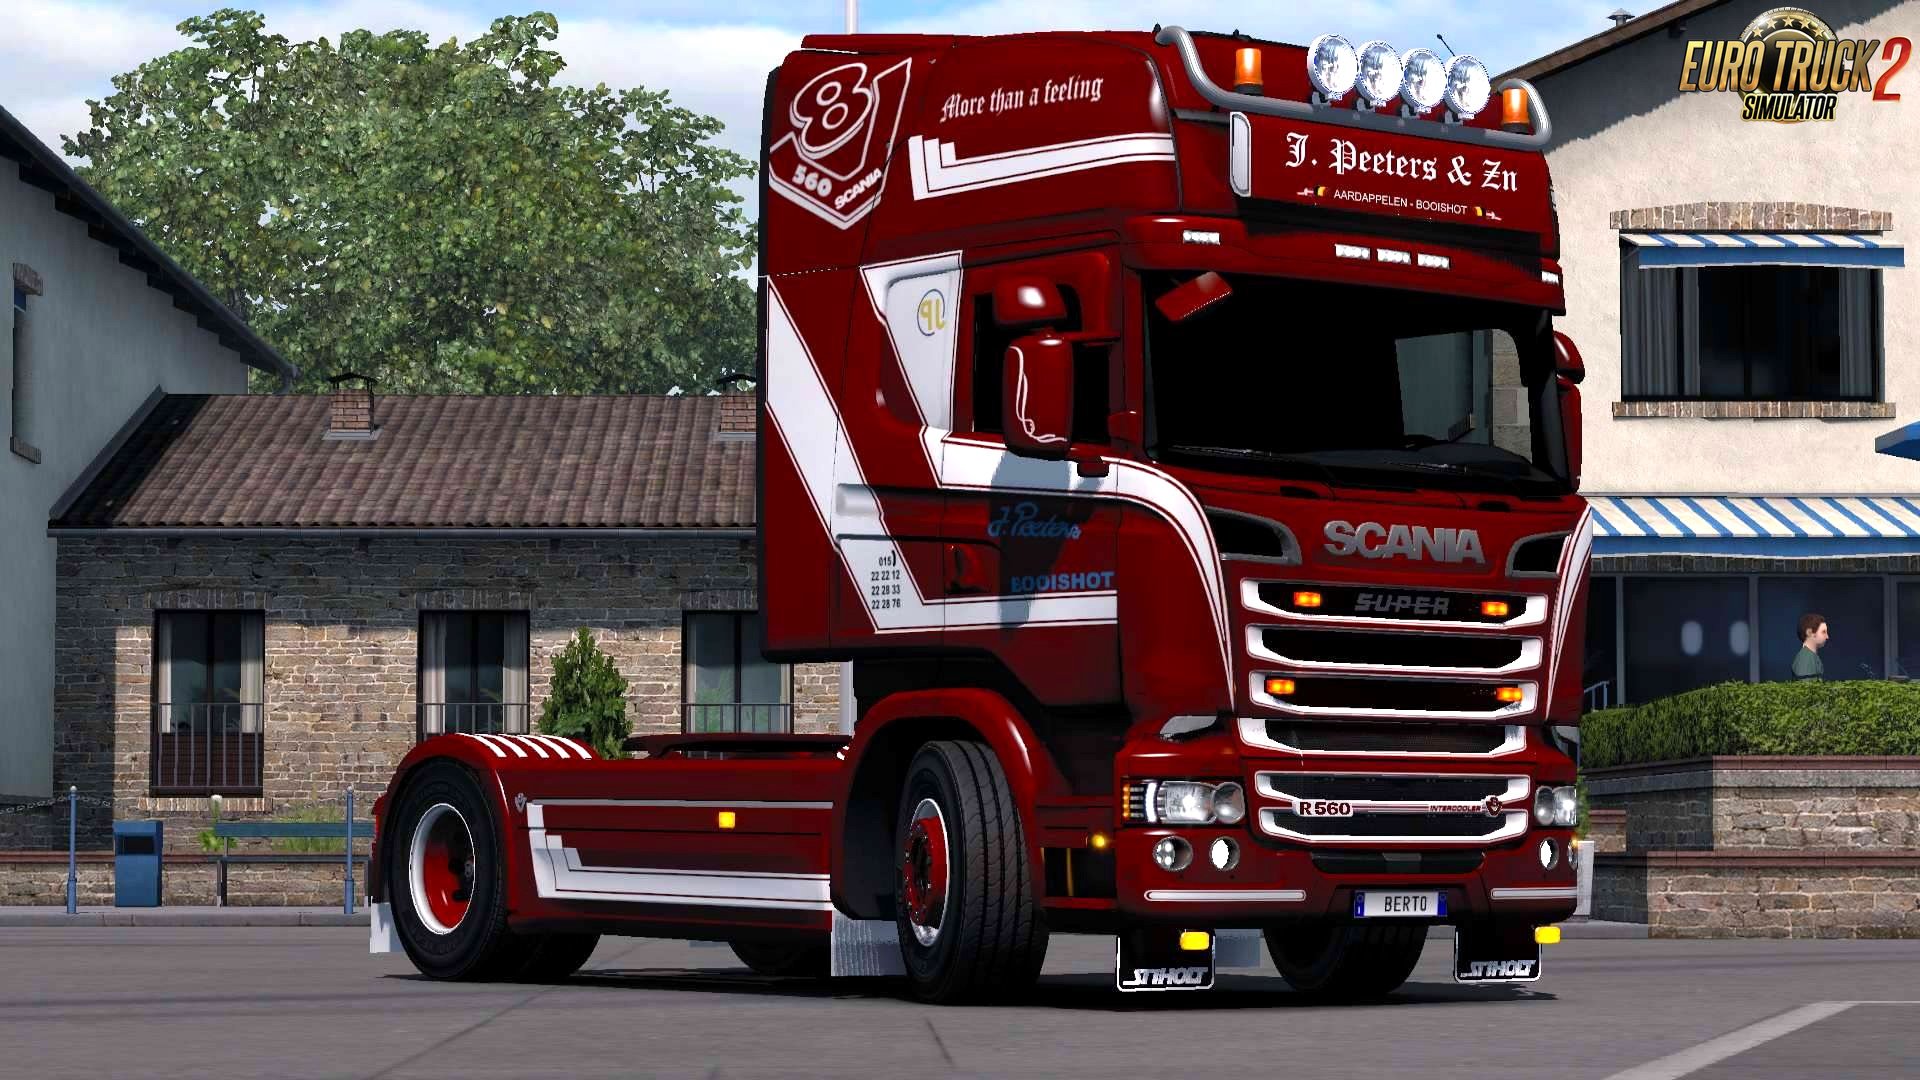 J. Peeters Combo Skin for Scania + Trailer v1.0 by DavyBerto (1.28.x)